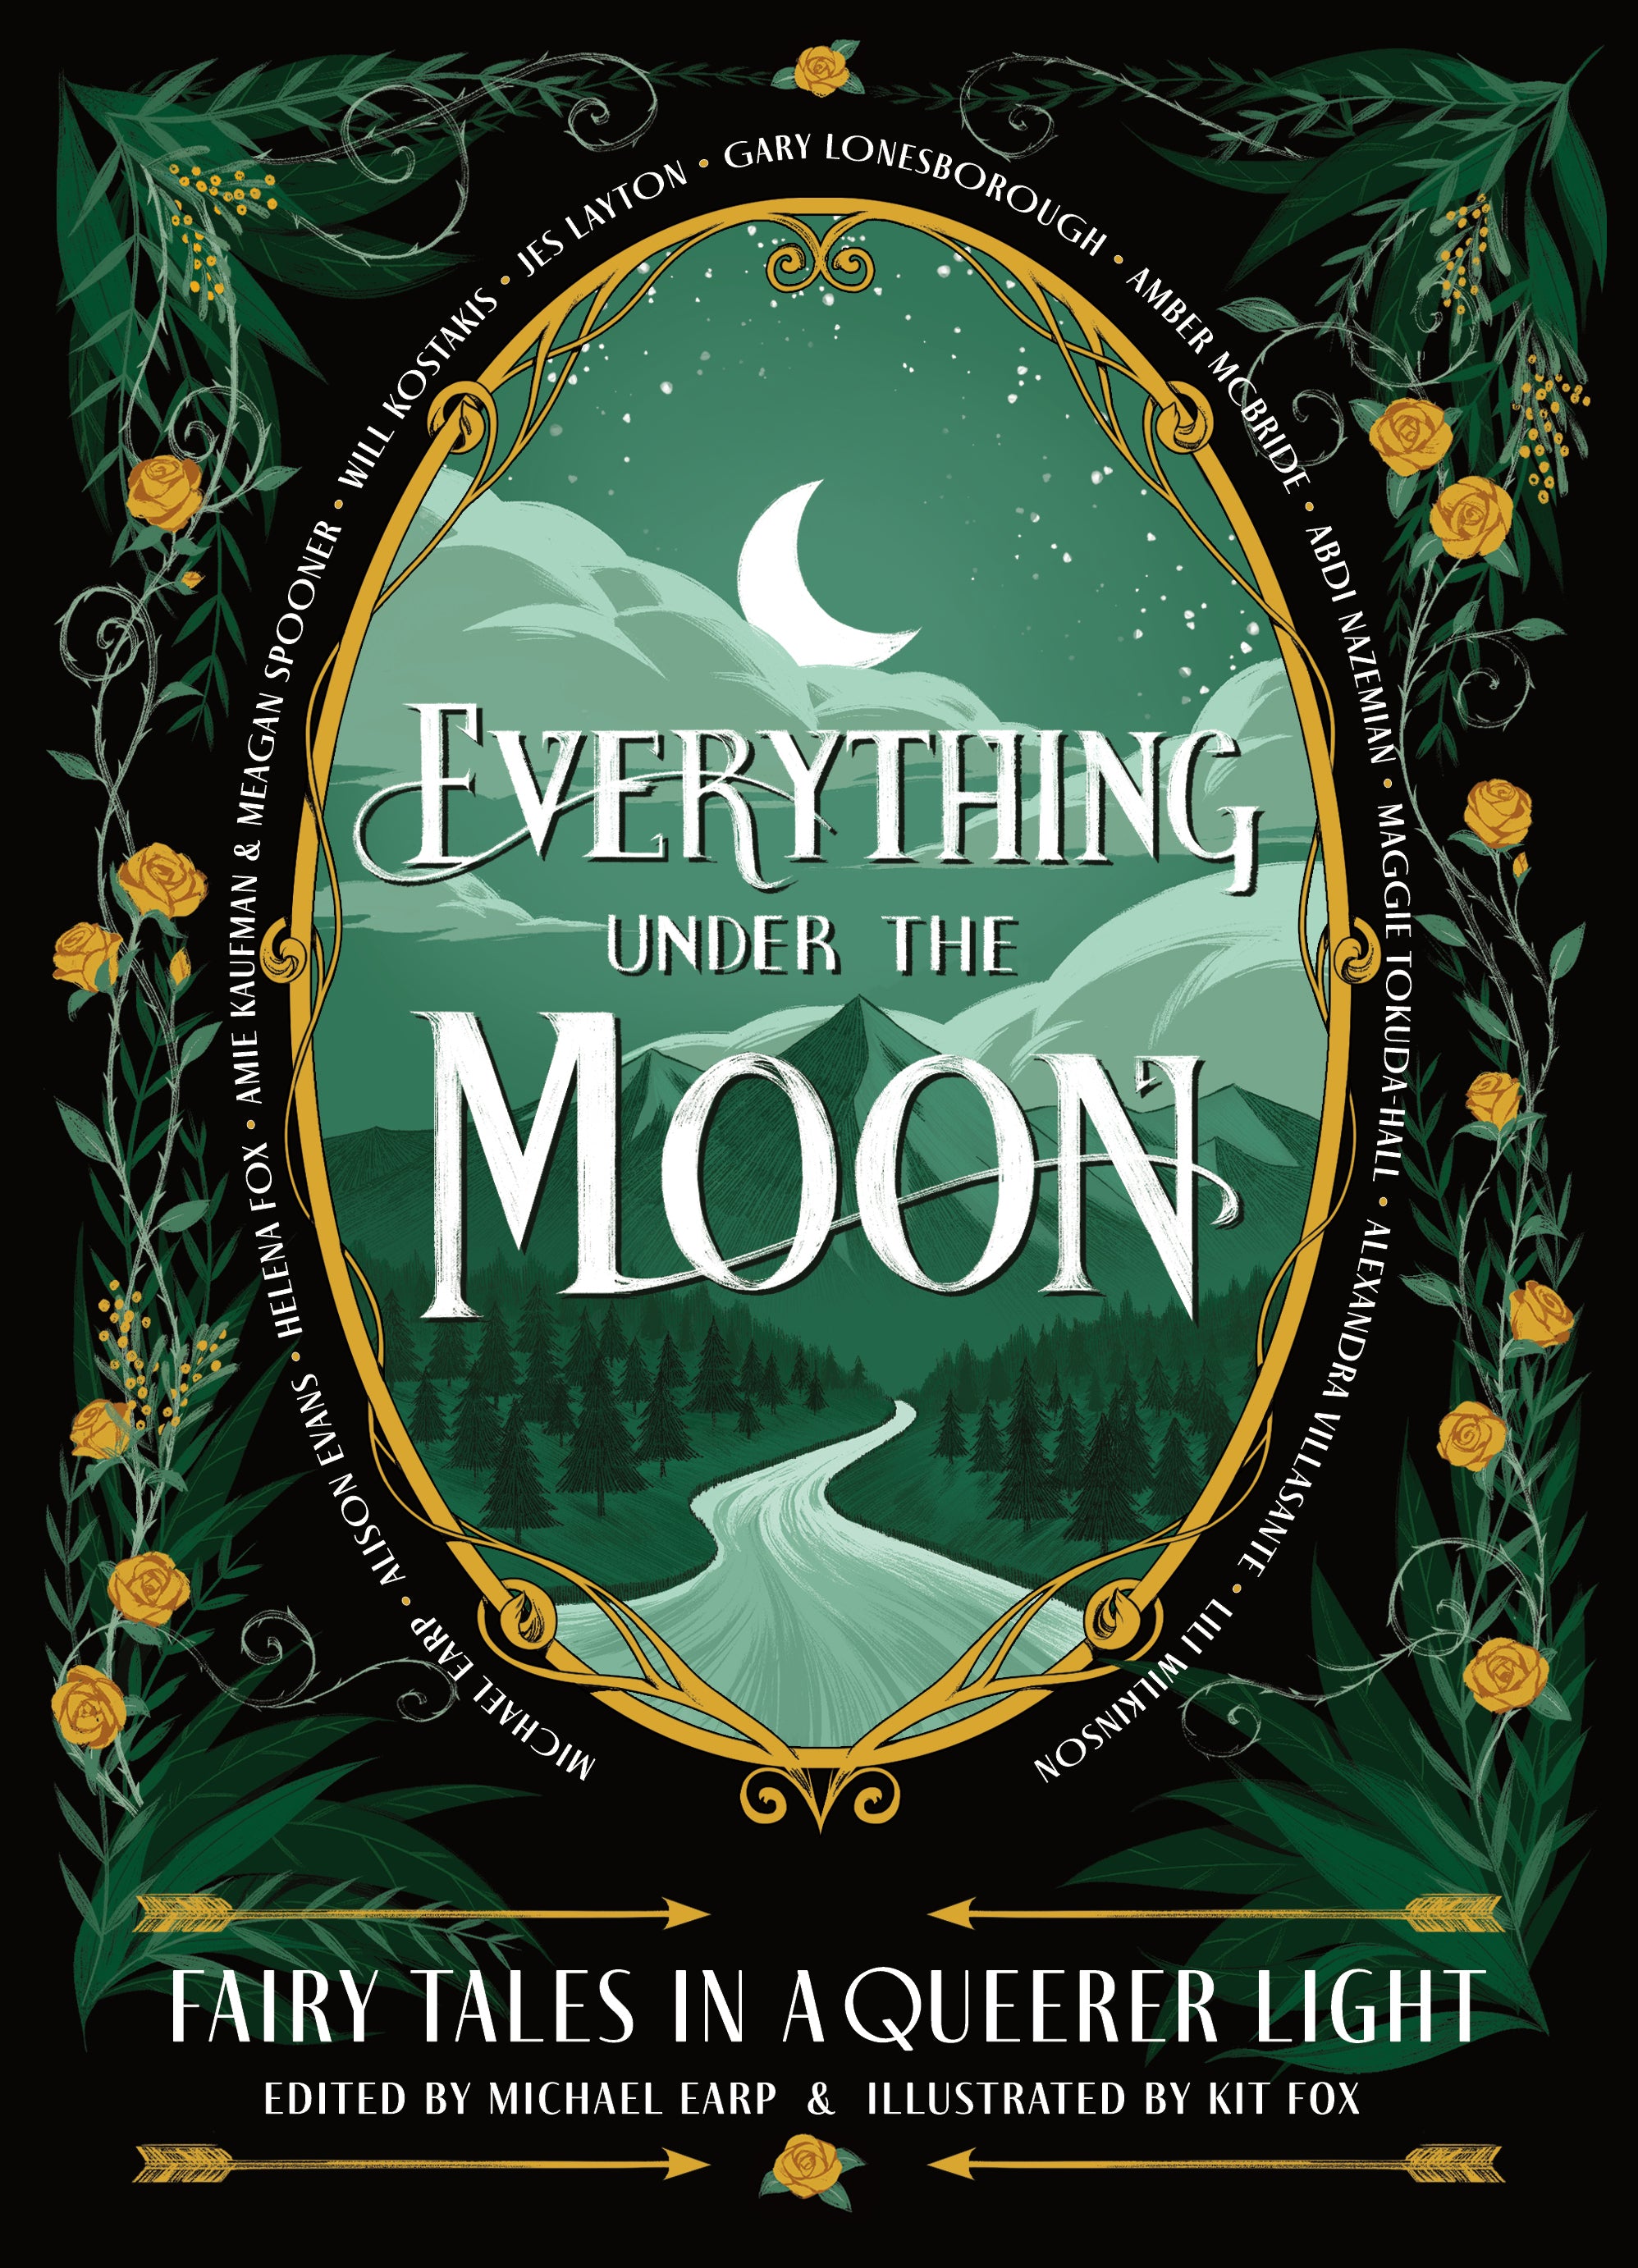 Everything Under the Moon: Fairy tales in a queerer light edited by Micheal Earp